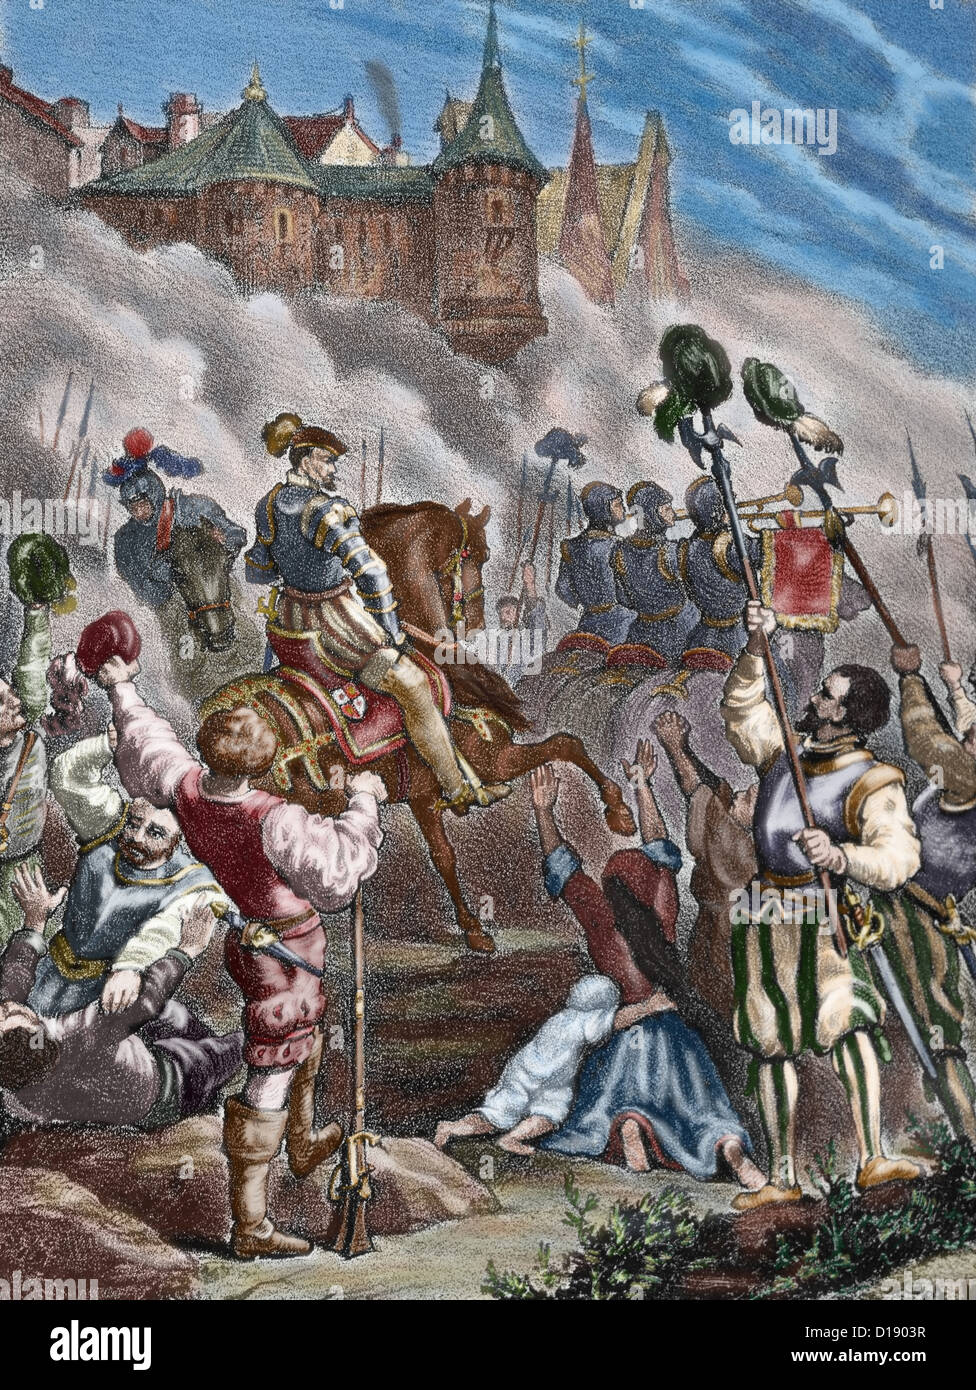 The Portuguese succession crisis of 1580. The fall of Lisbon leaded by the 3rd Duke of Alba. Colored engraving. Stock Photo